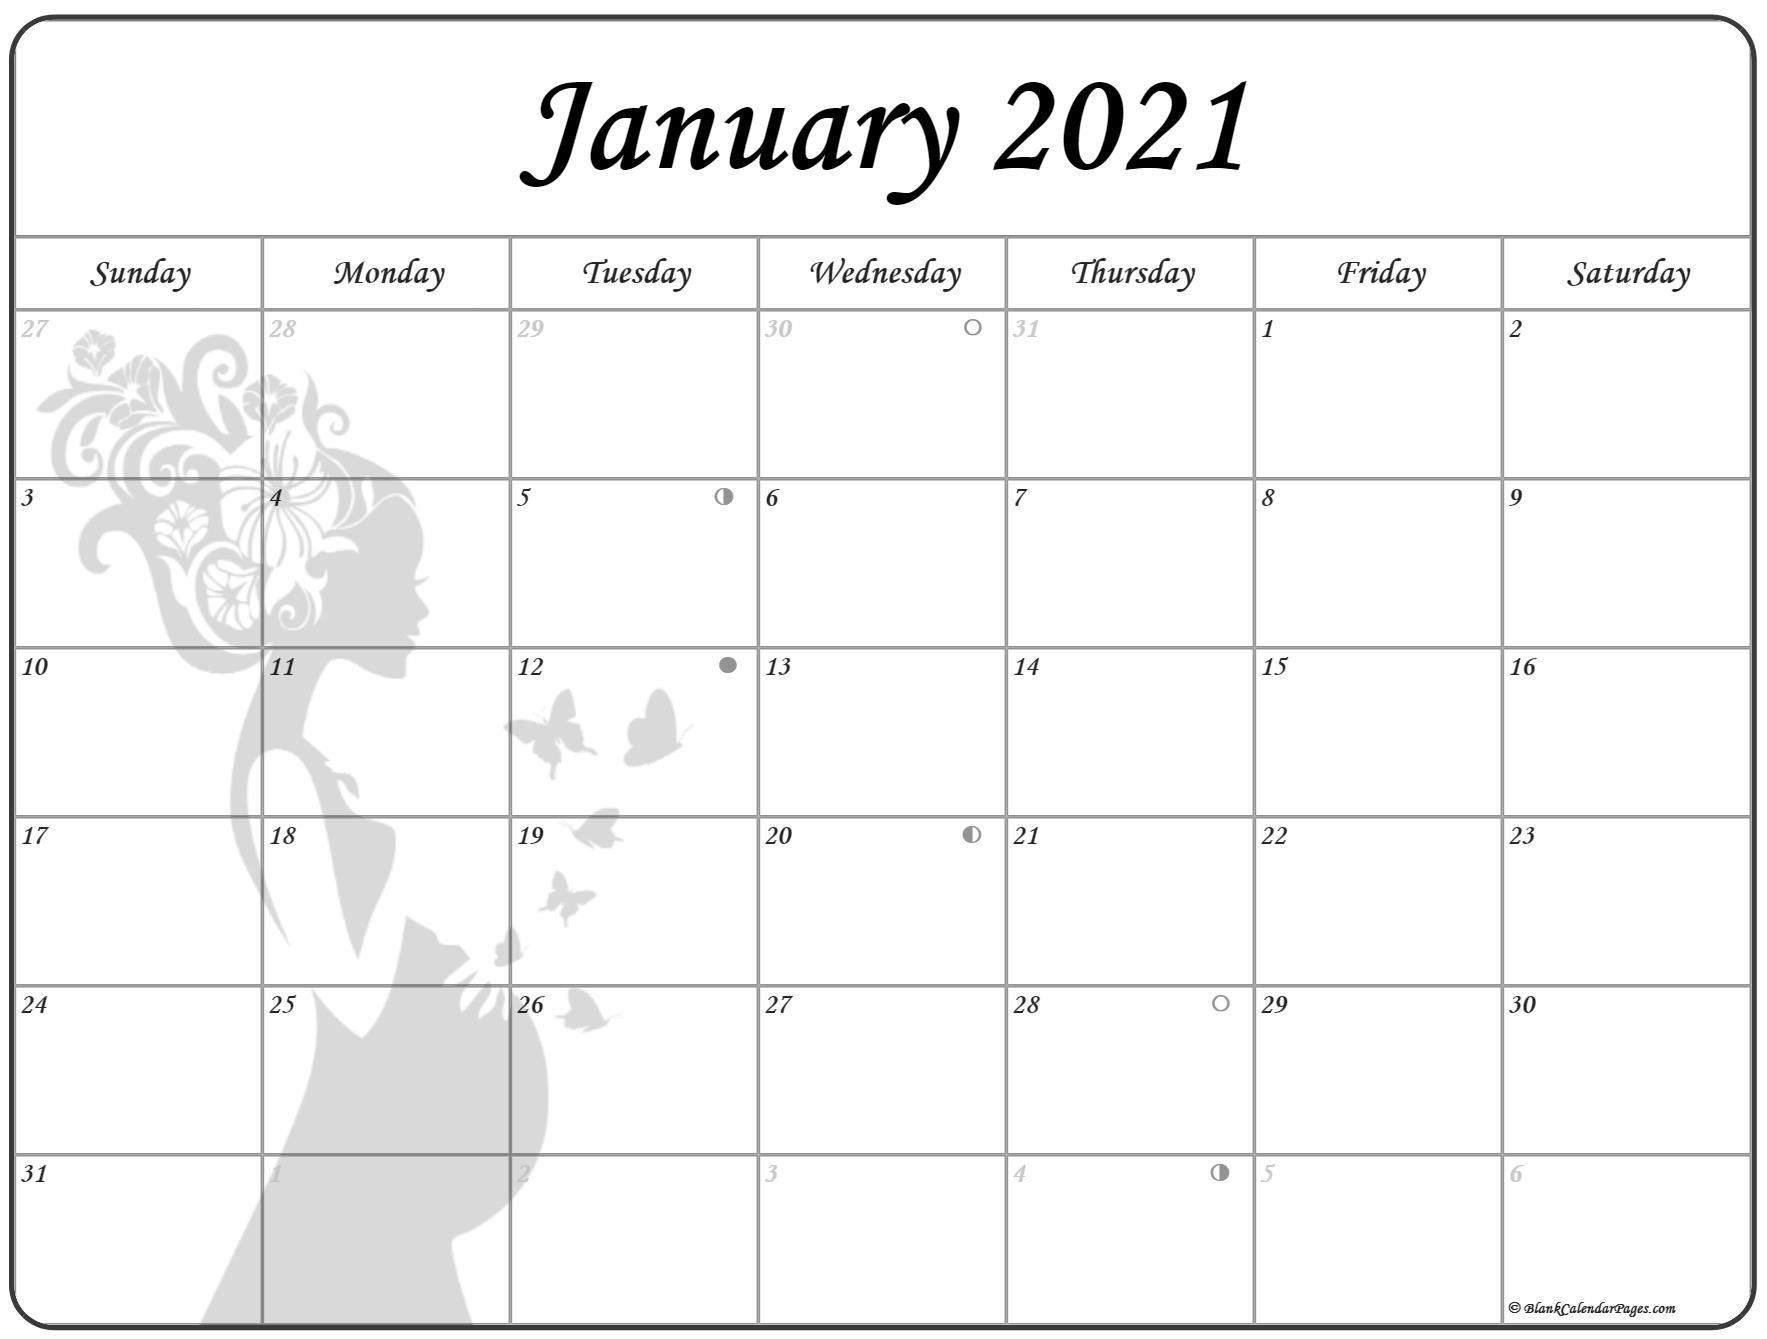 Collection of January 2021 photo calendars with image filters